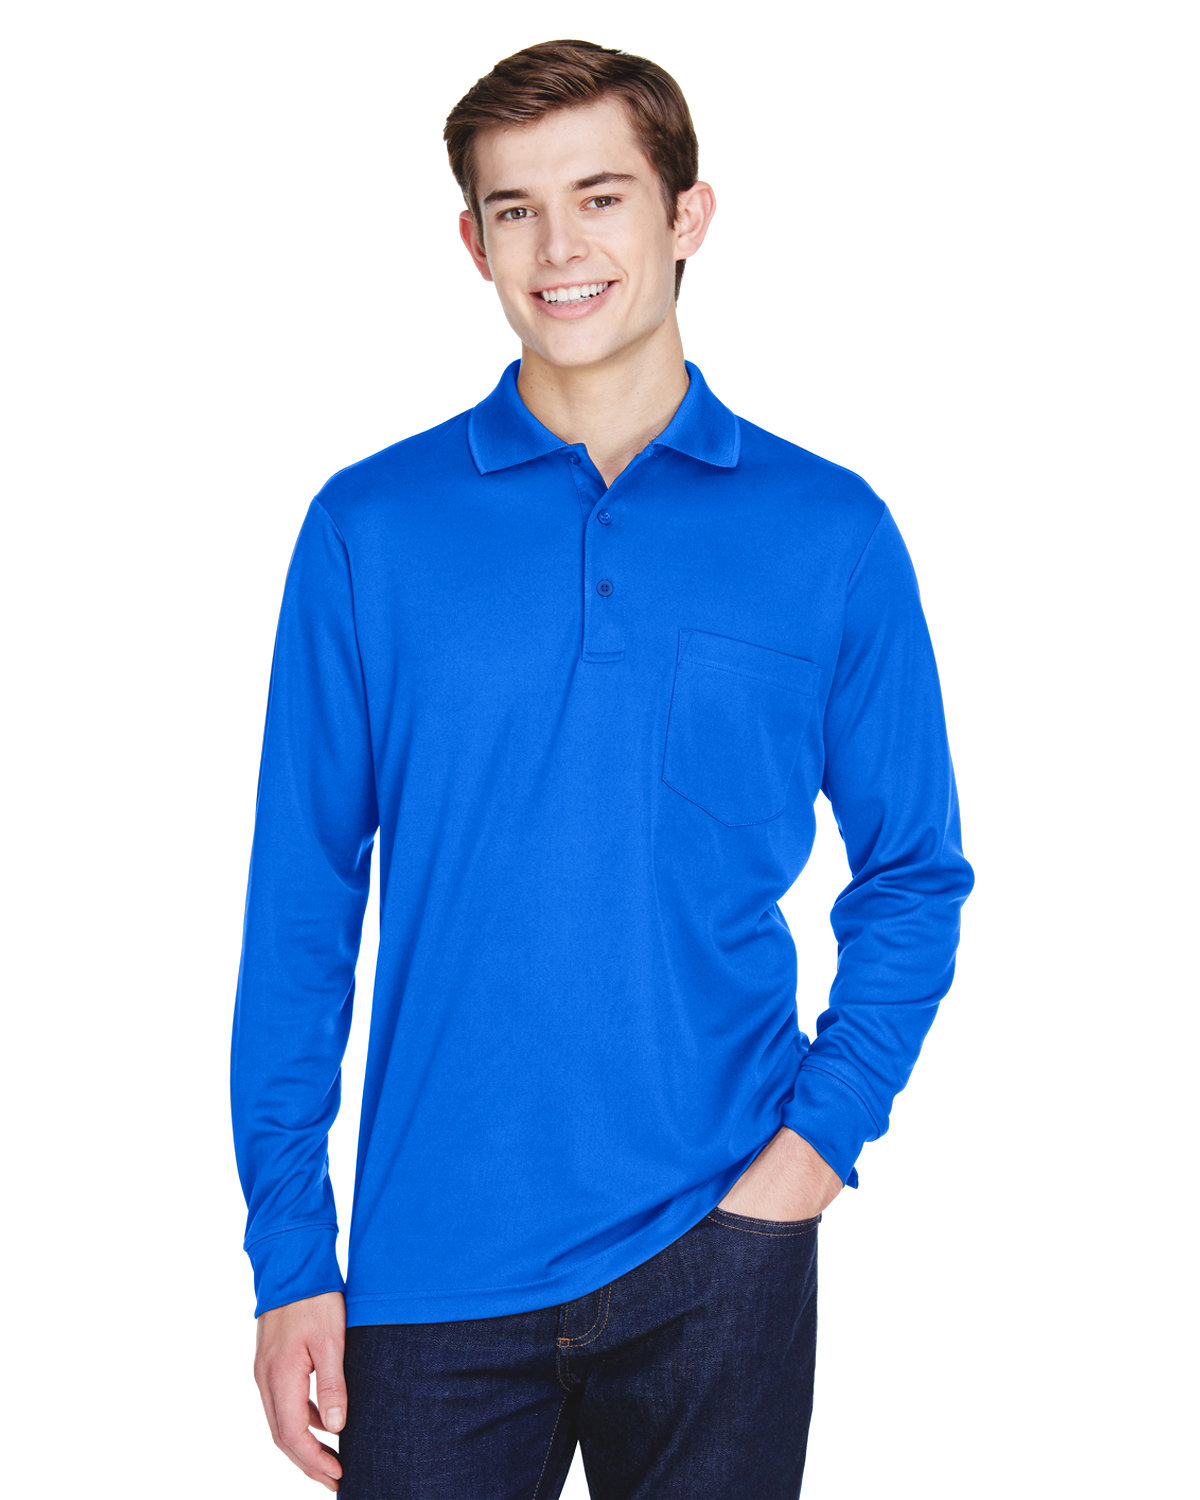 Adult Pinnacle Performance Long-Sleeve Pique Polo With Pocket-